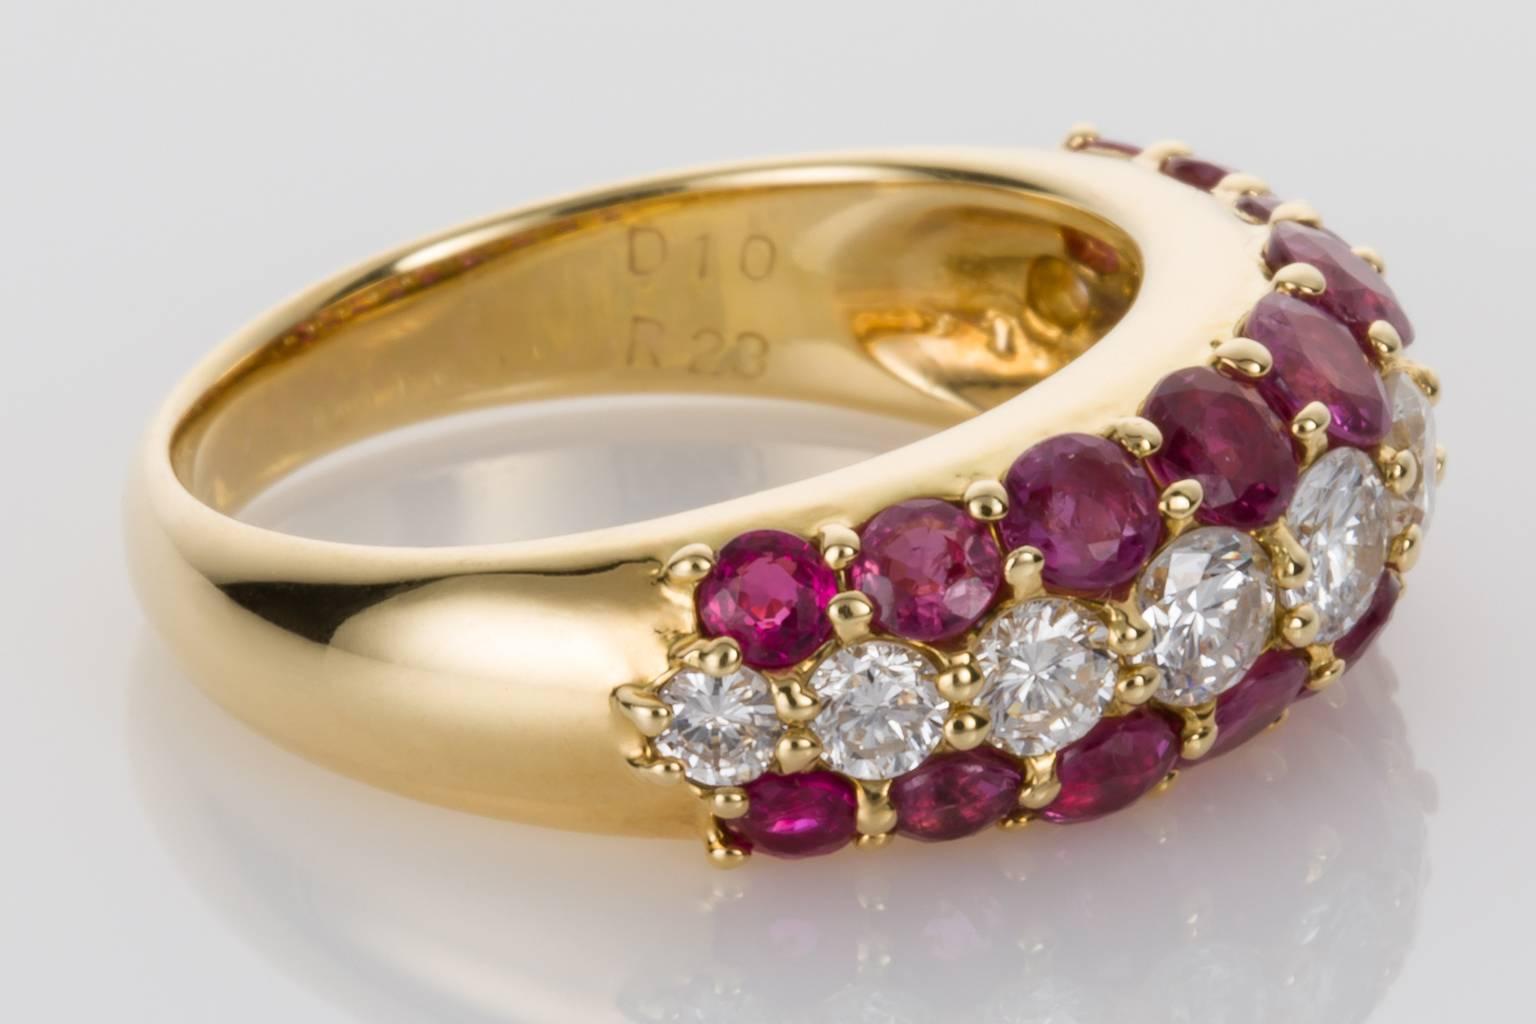 Elegant and stylish, wearable and stackable if desired. This lovely band is set with 10 brilliant cut white diamonds weighing approximately 0.65cts and 18 glorious red rubies with an estimated weight of 1.35cts mounted in 18k yellow gold. The